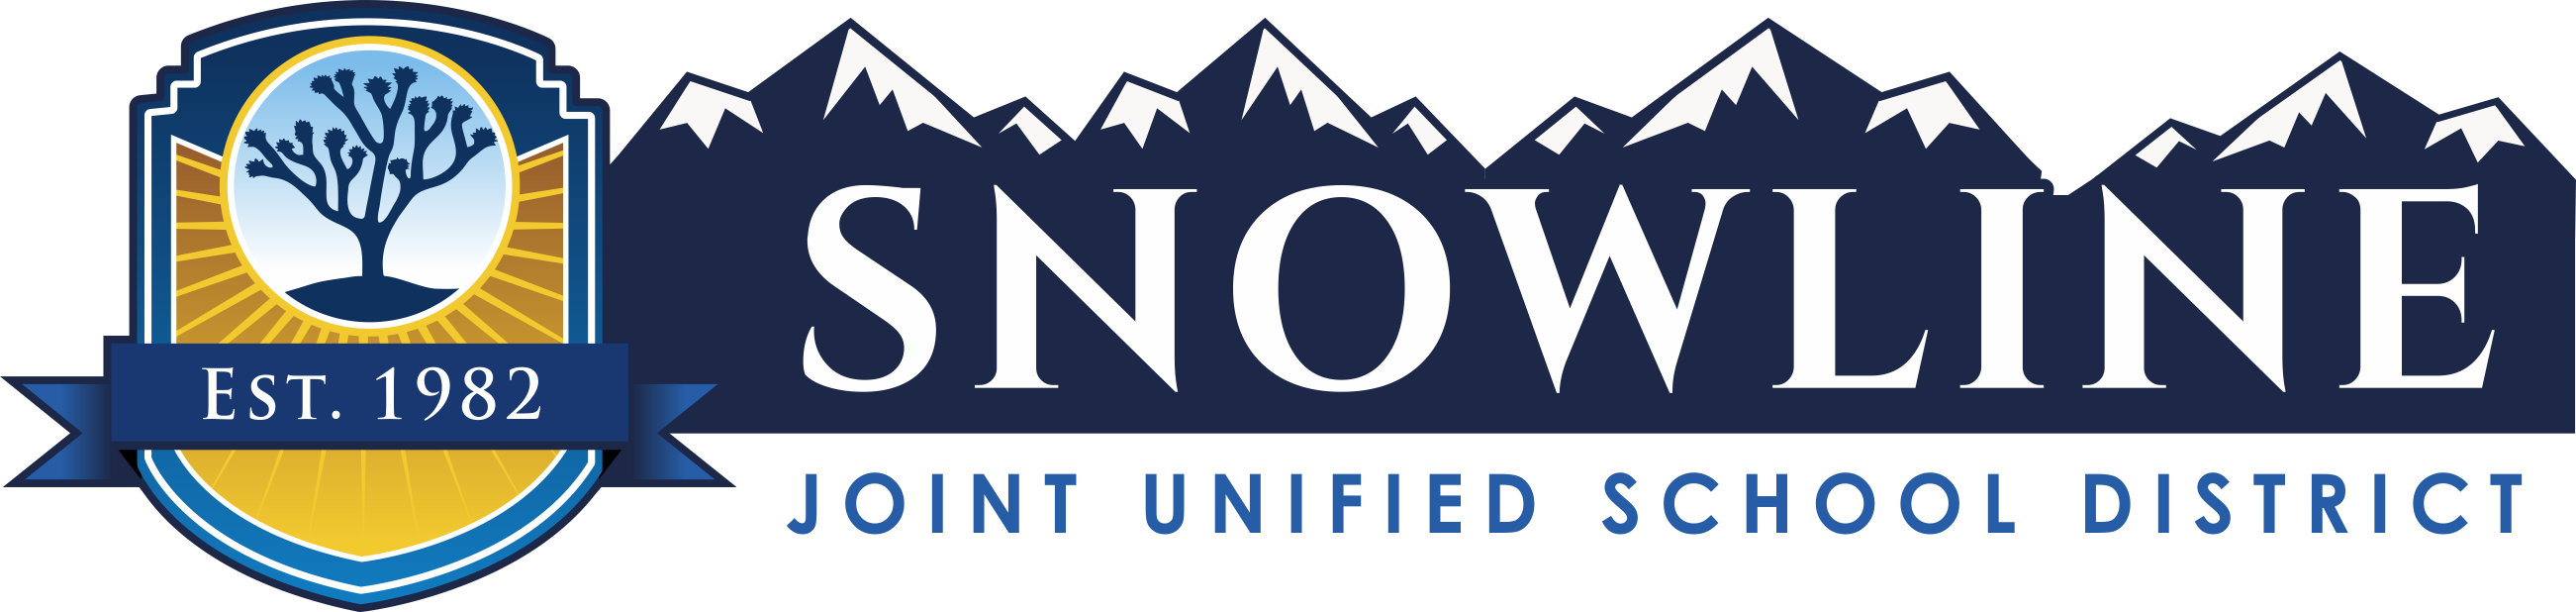 About Snowline - Miscellaneous - Snowline Joint Unified School District